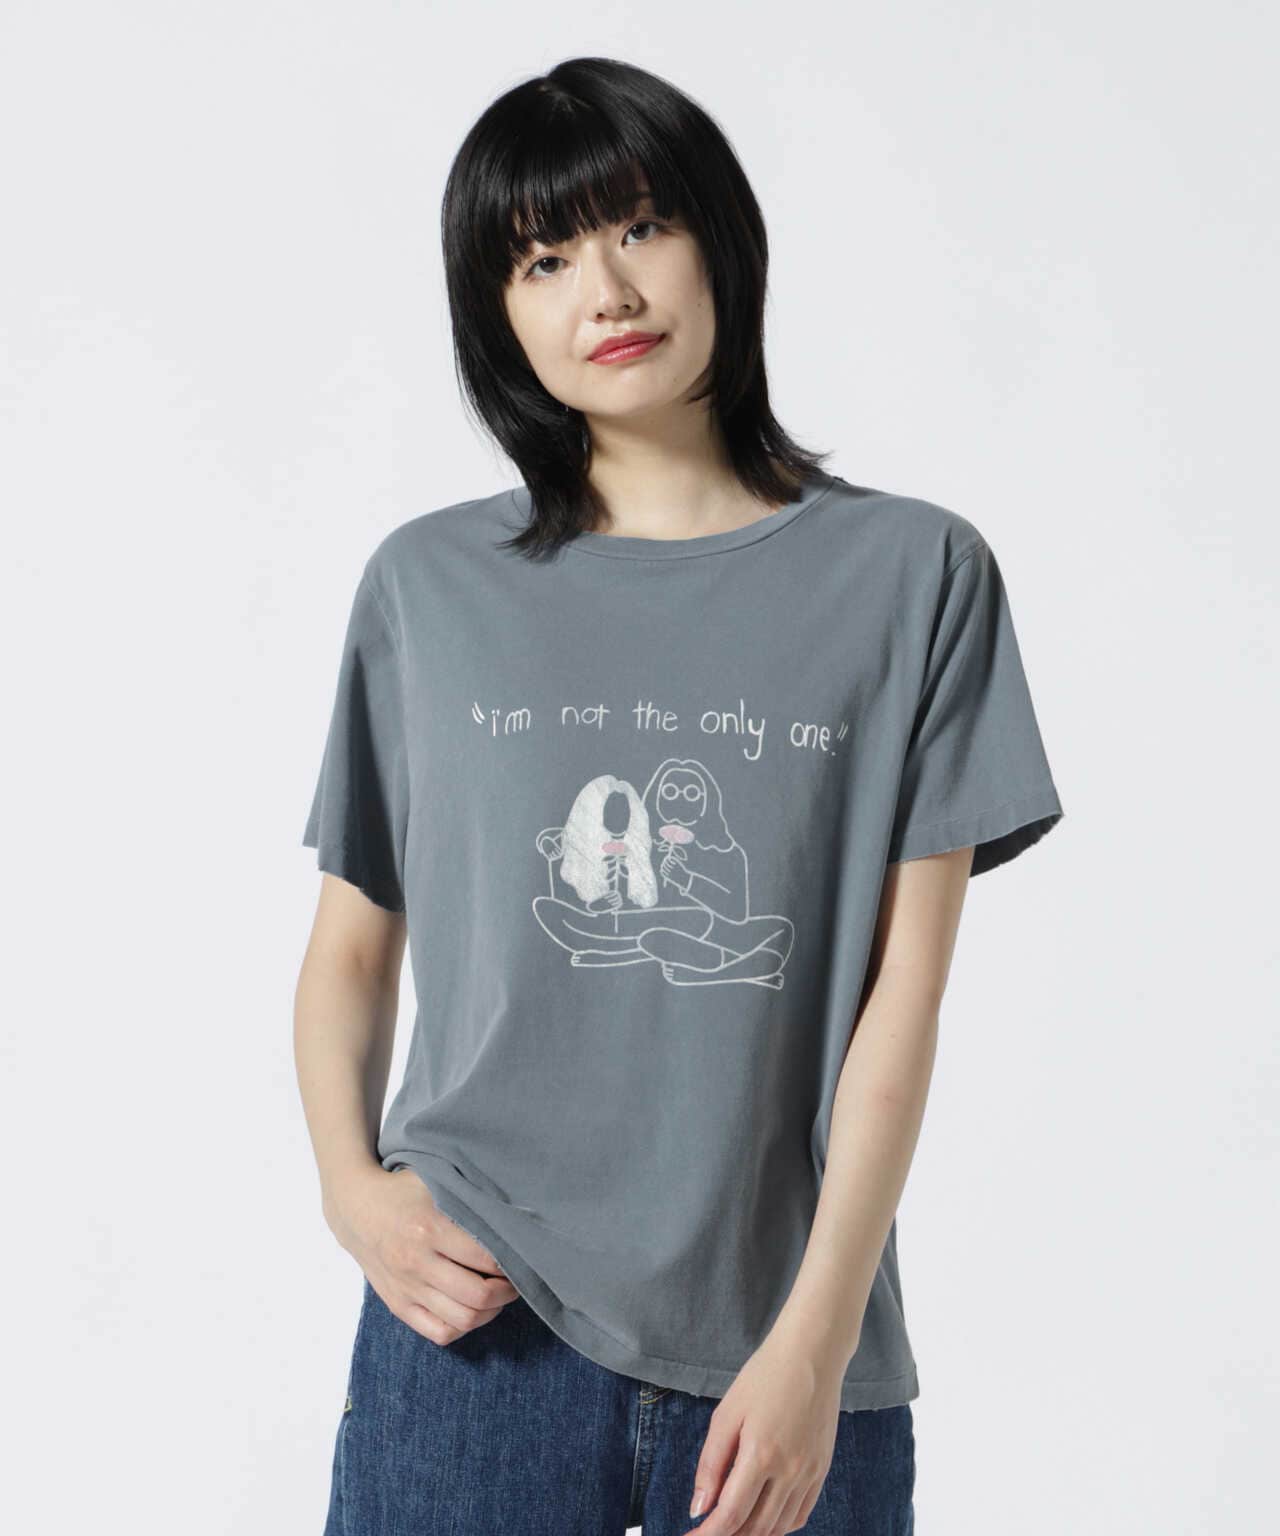 REMI RELIEF(レミレリーフ) 別注WOMEN'S加工Tシャツ I'm not the only one | B'2nd ( ビーセカンド )  | US ONLINE STORE（US オンラインストア）